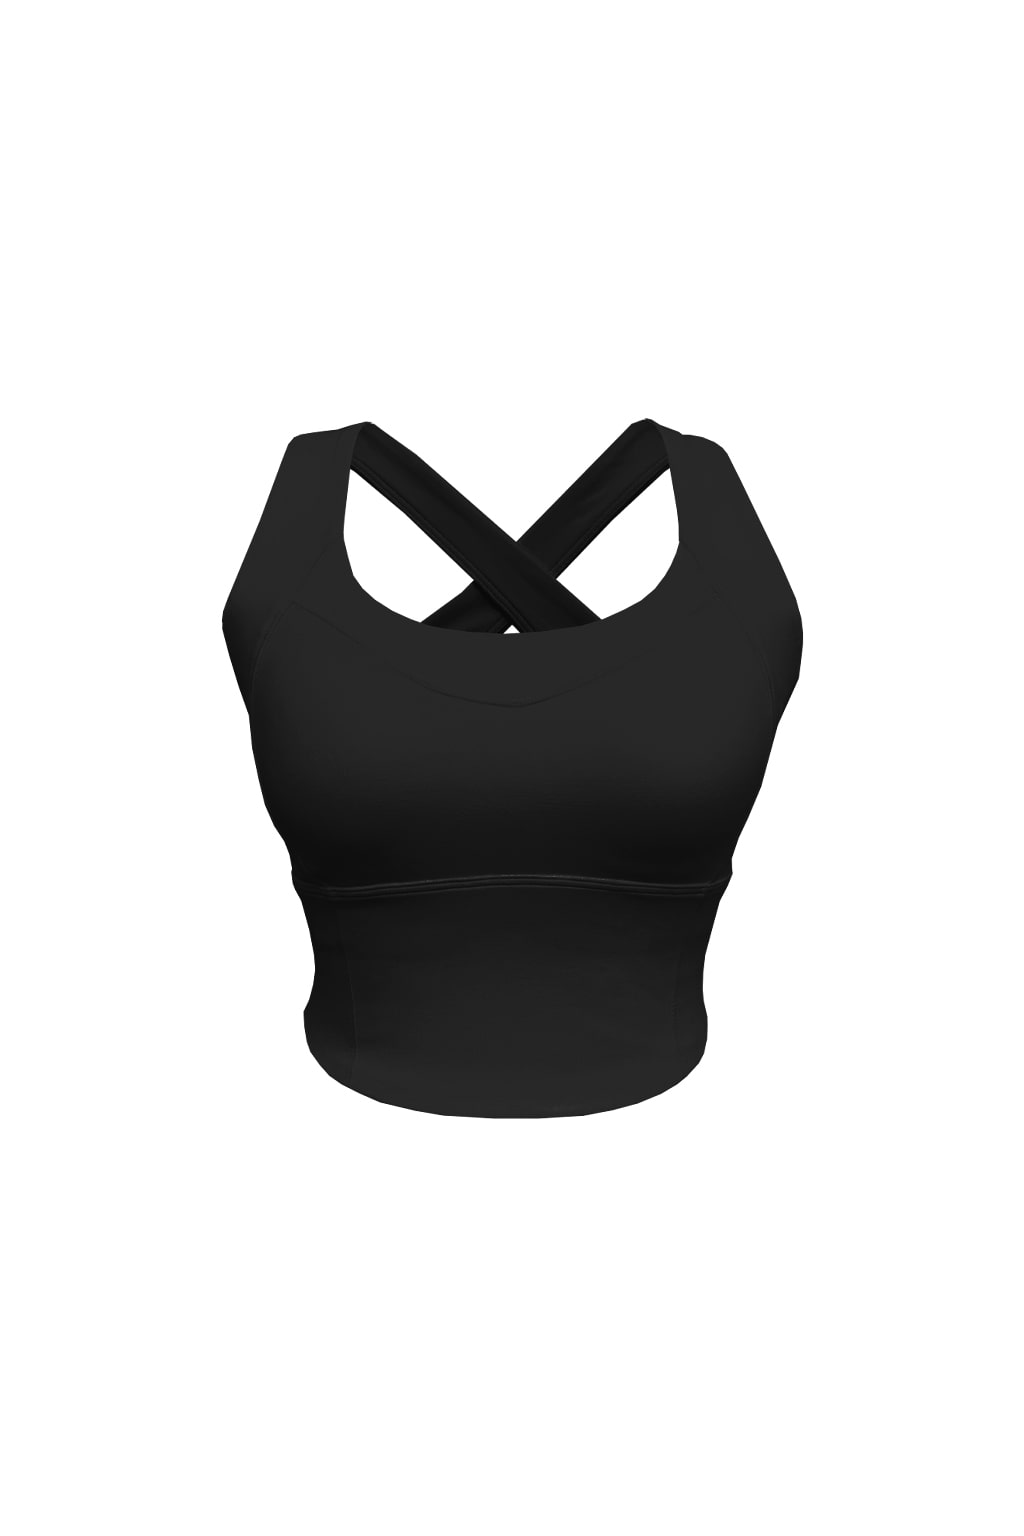 All-in-one support bra top black